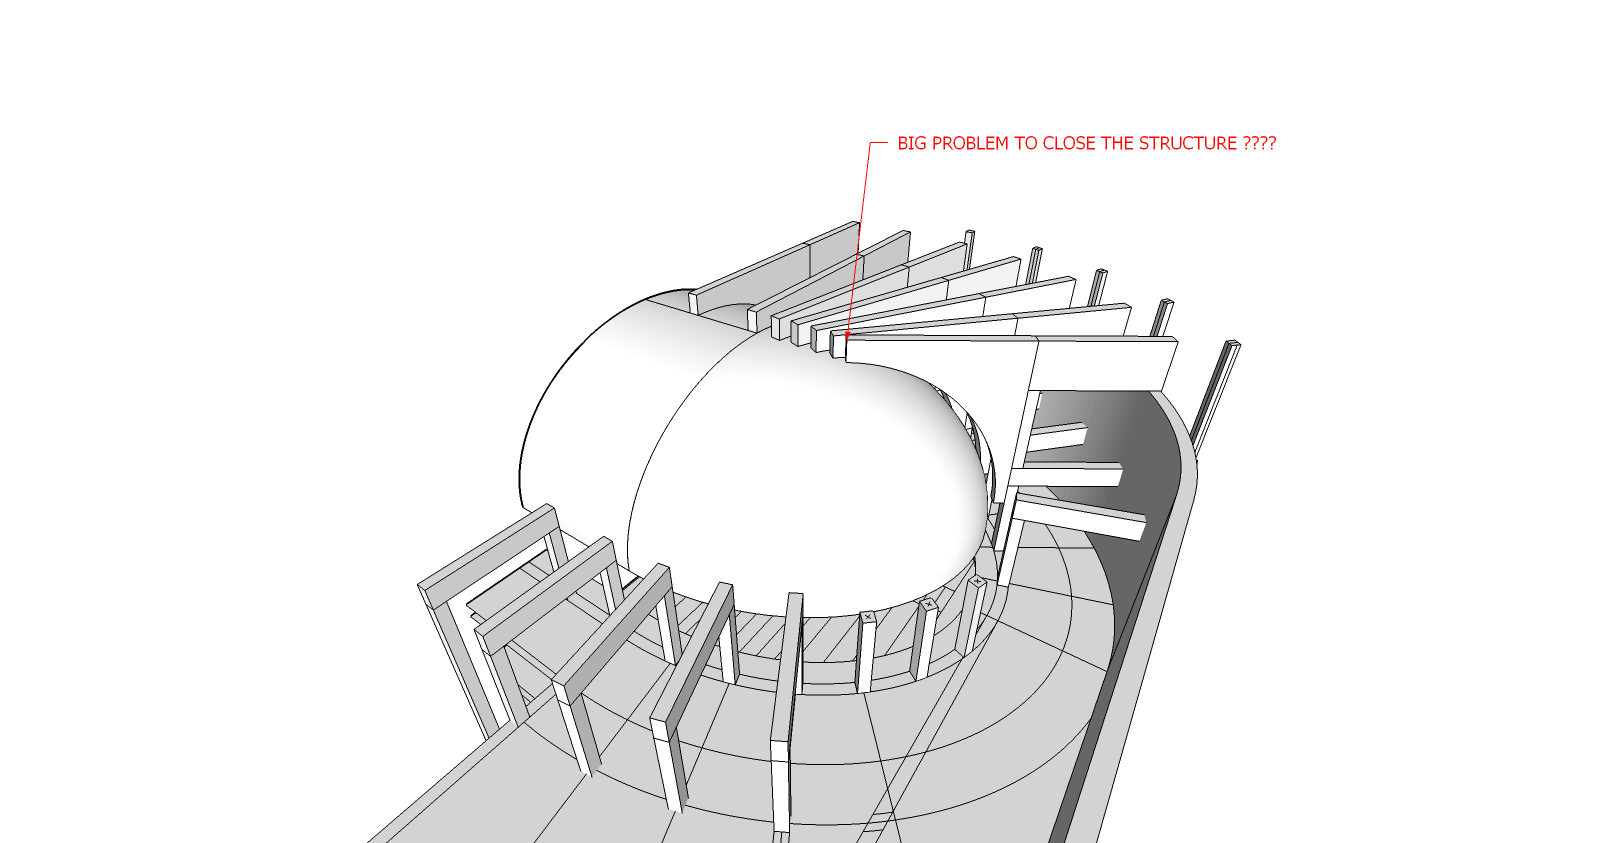 2º Issue trouble. Try to correct structure of inside elliptical dome surface